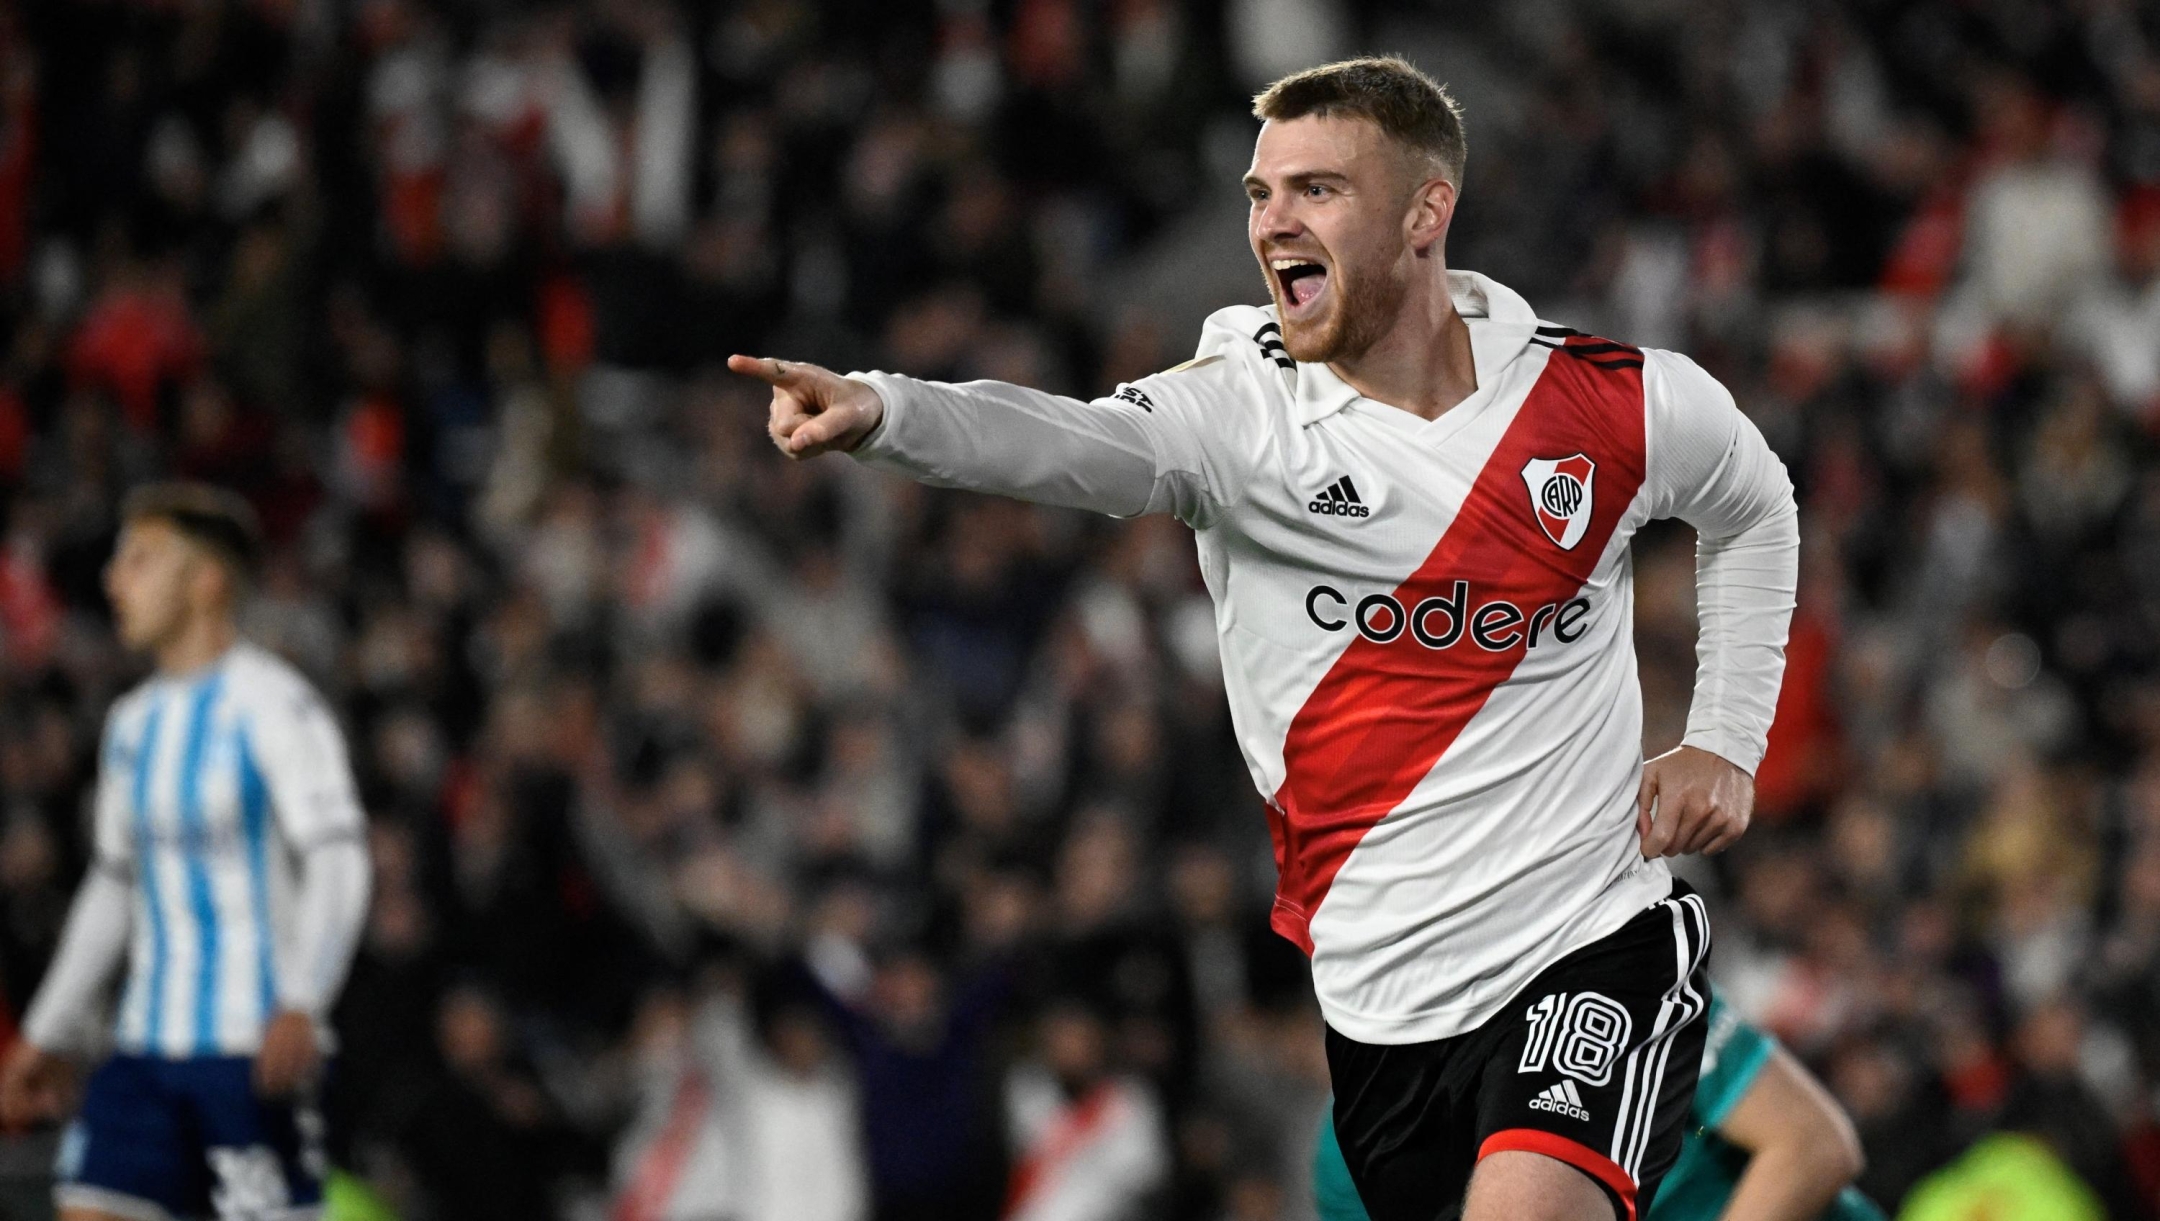 River Plate's forward Lucas Beltran celebrates his goal against Racing during the Argentine Professional Football League Tournament 2023 at El Monumental stadium, in Buenos Aires, on July 28, 2023. (Photo by LUIS ROBAYO / AFP)